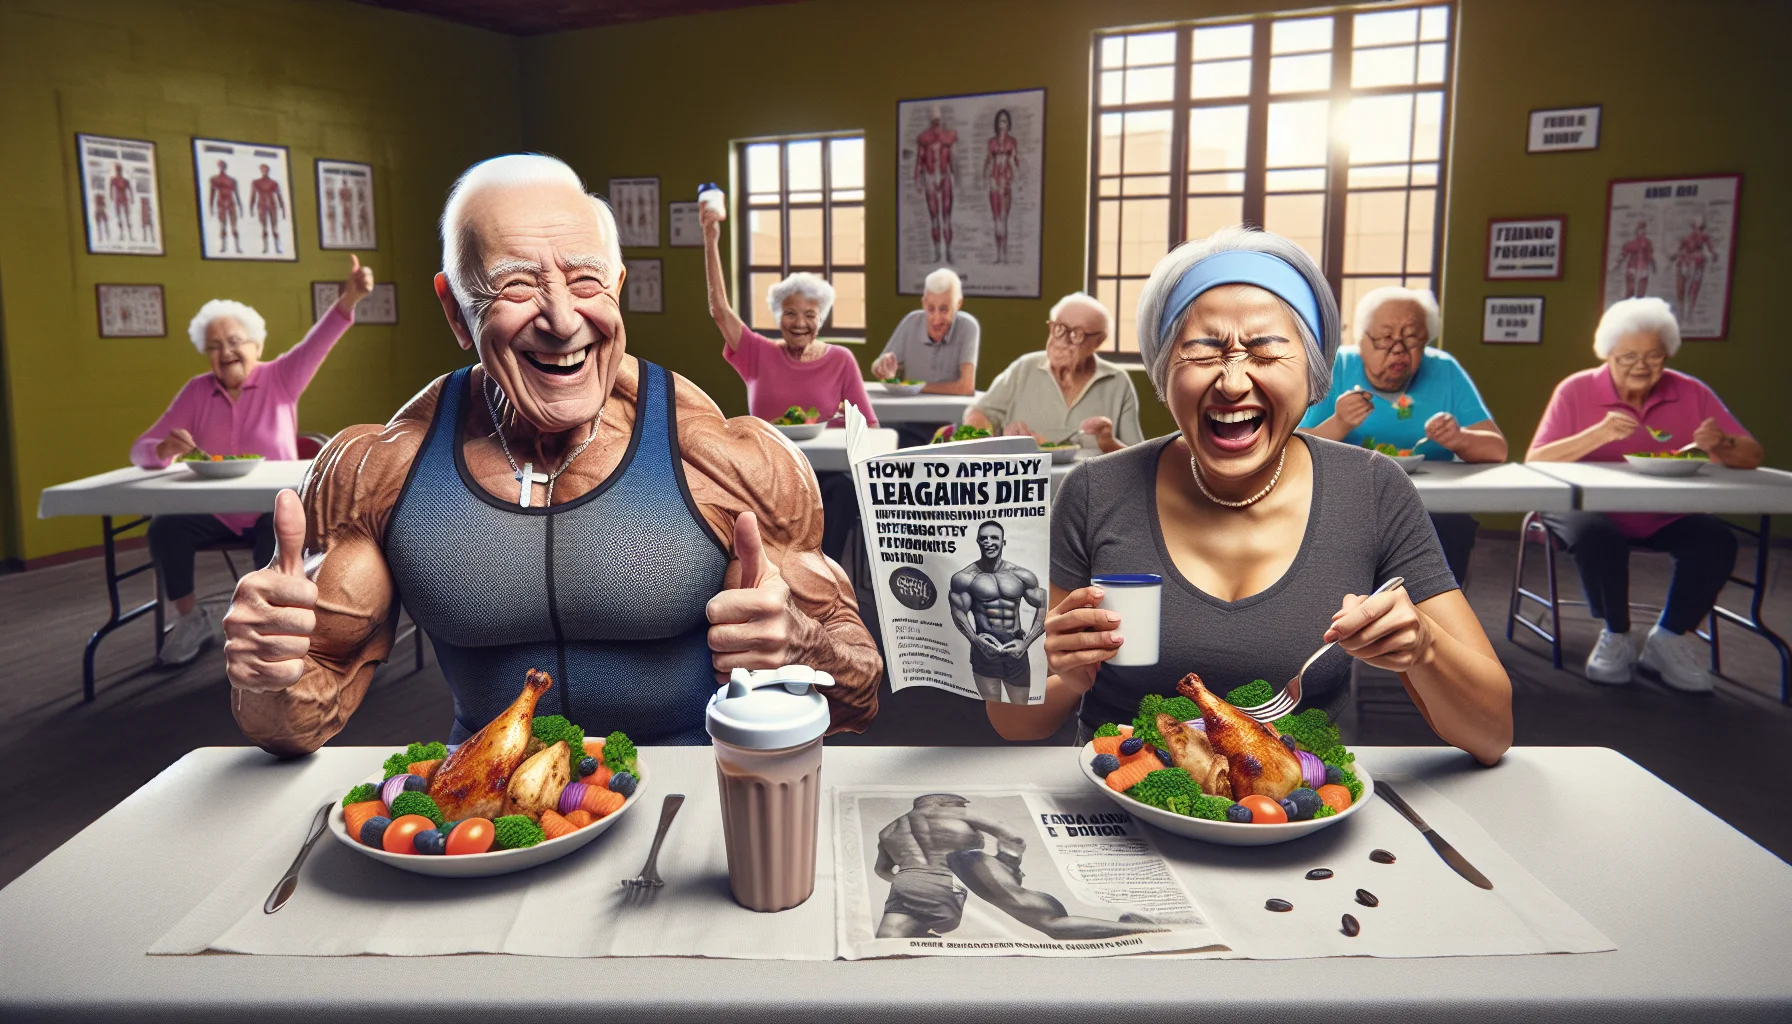 Generate a comical image set in a senior citizens' fitness center, where the subjects indulge in a Leangains diet. Picture an elderly Caucasian man with a broad smile, strong physique, and a protein shake in his hand, giving a thumbs-up. Beside him stands a Hispanic woman chuckling, eating a large chicken salad full of vibrant, colourful vegetables while reading a 'How to apply Leangains diet' pamphlet. The background is filled with other elderly individuals of various descents like Black, Middle-Eastern, and South Asian, engaging in similar actions and sharing a light-hearted atmosphere. They are all partaking in a healthy meal during the classic intermittent fasting 'feeding window,' humorously depicted by an open window in the wall revealing a sunshine-filled sky.